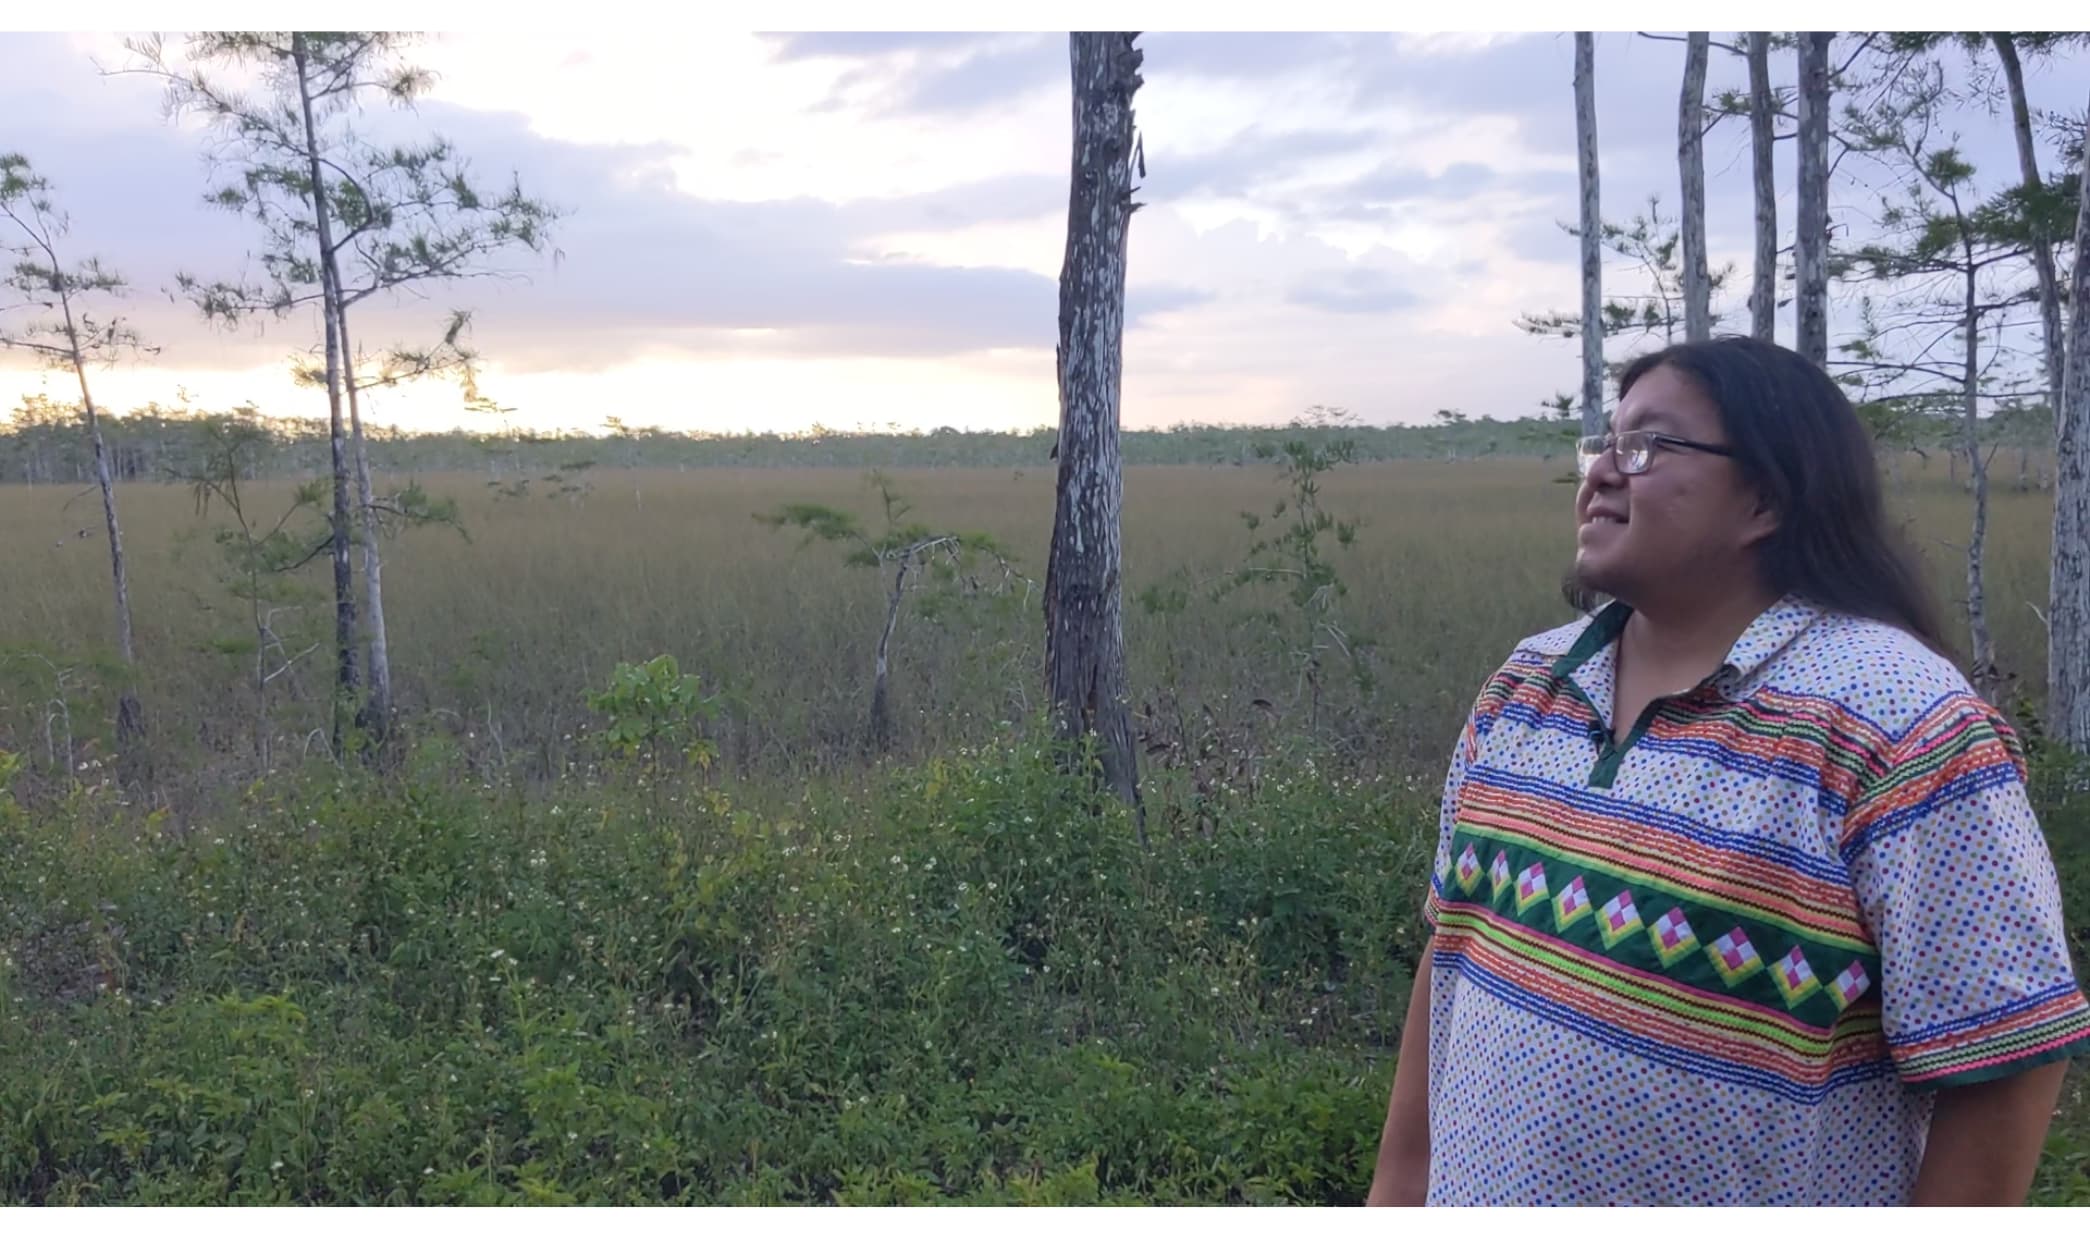 Photo of Rev. Houston Cypress stands in front of Everglades during sunset